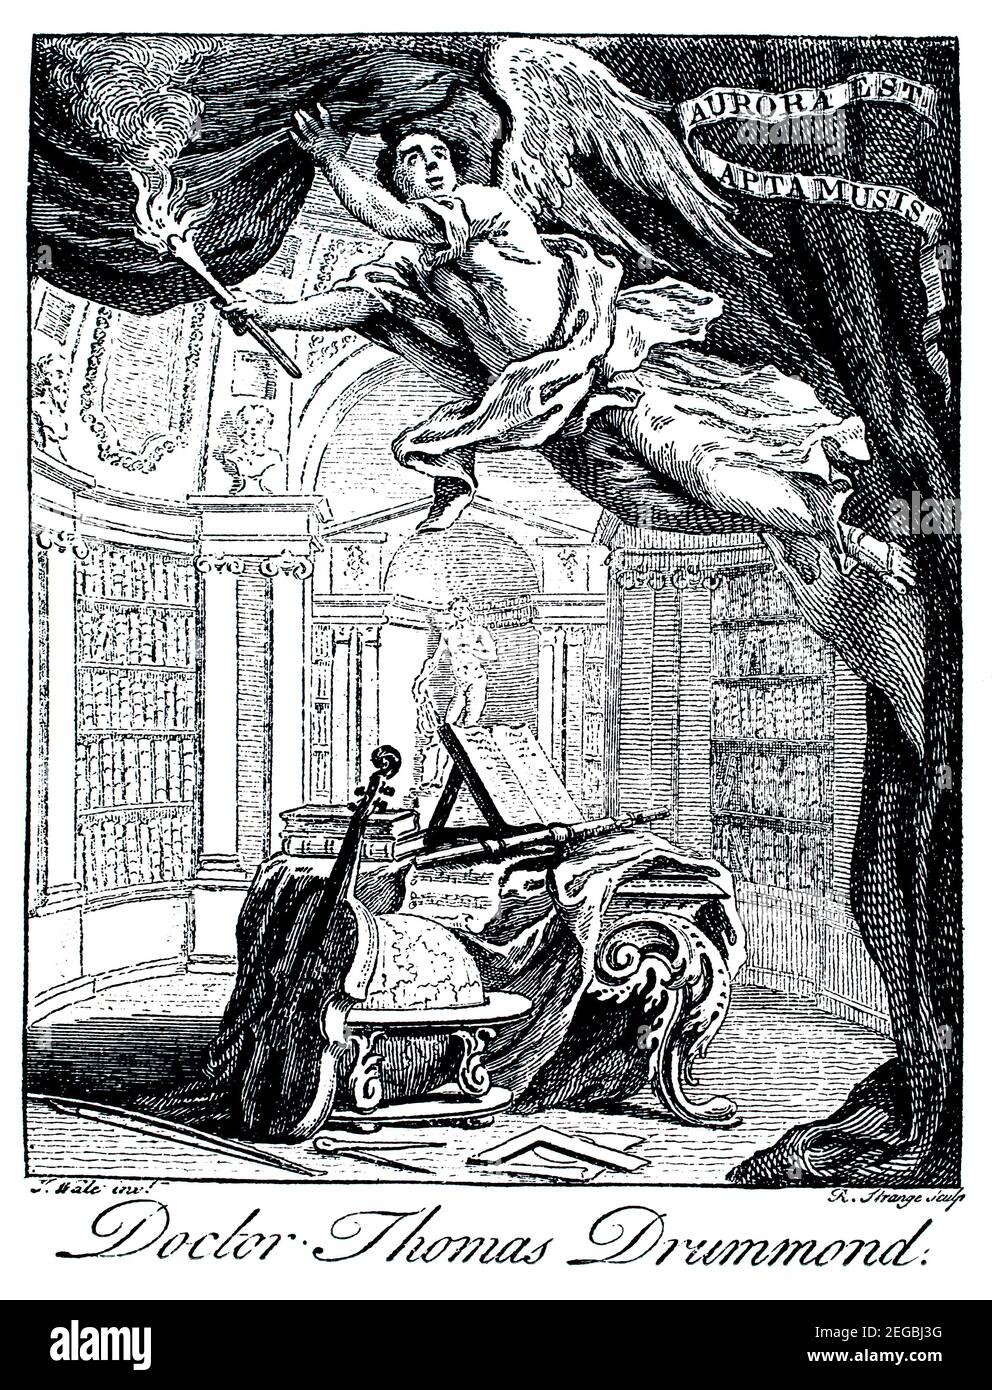 1700s bookplate for Doctor Thomas Drummond drawn by T Wall and engraved by Robert Strange Stock Photo